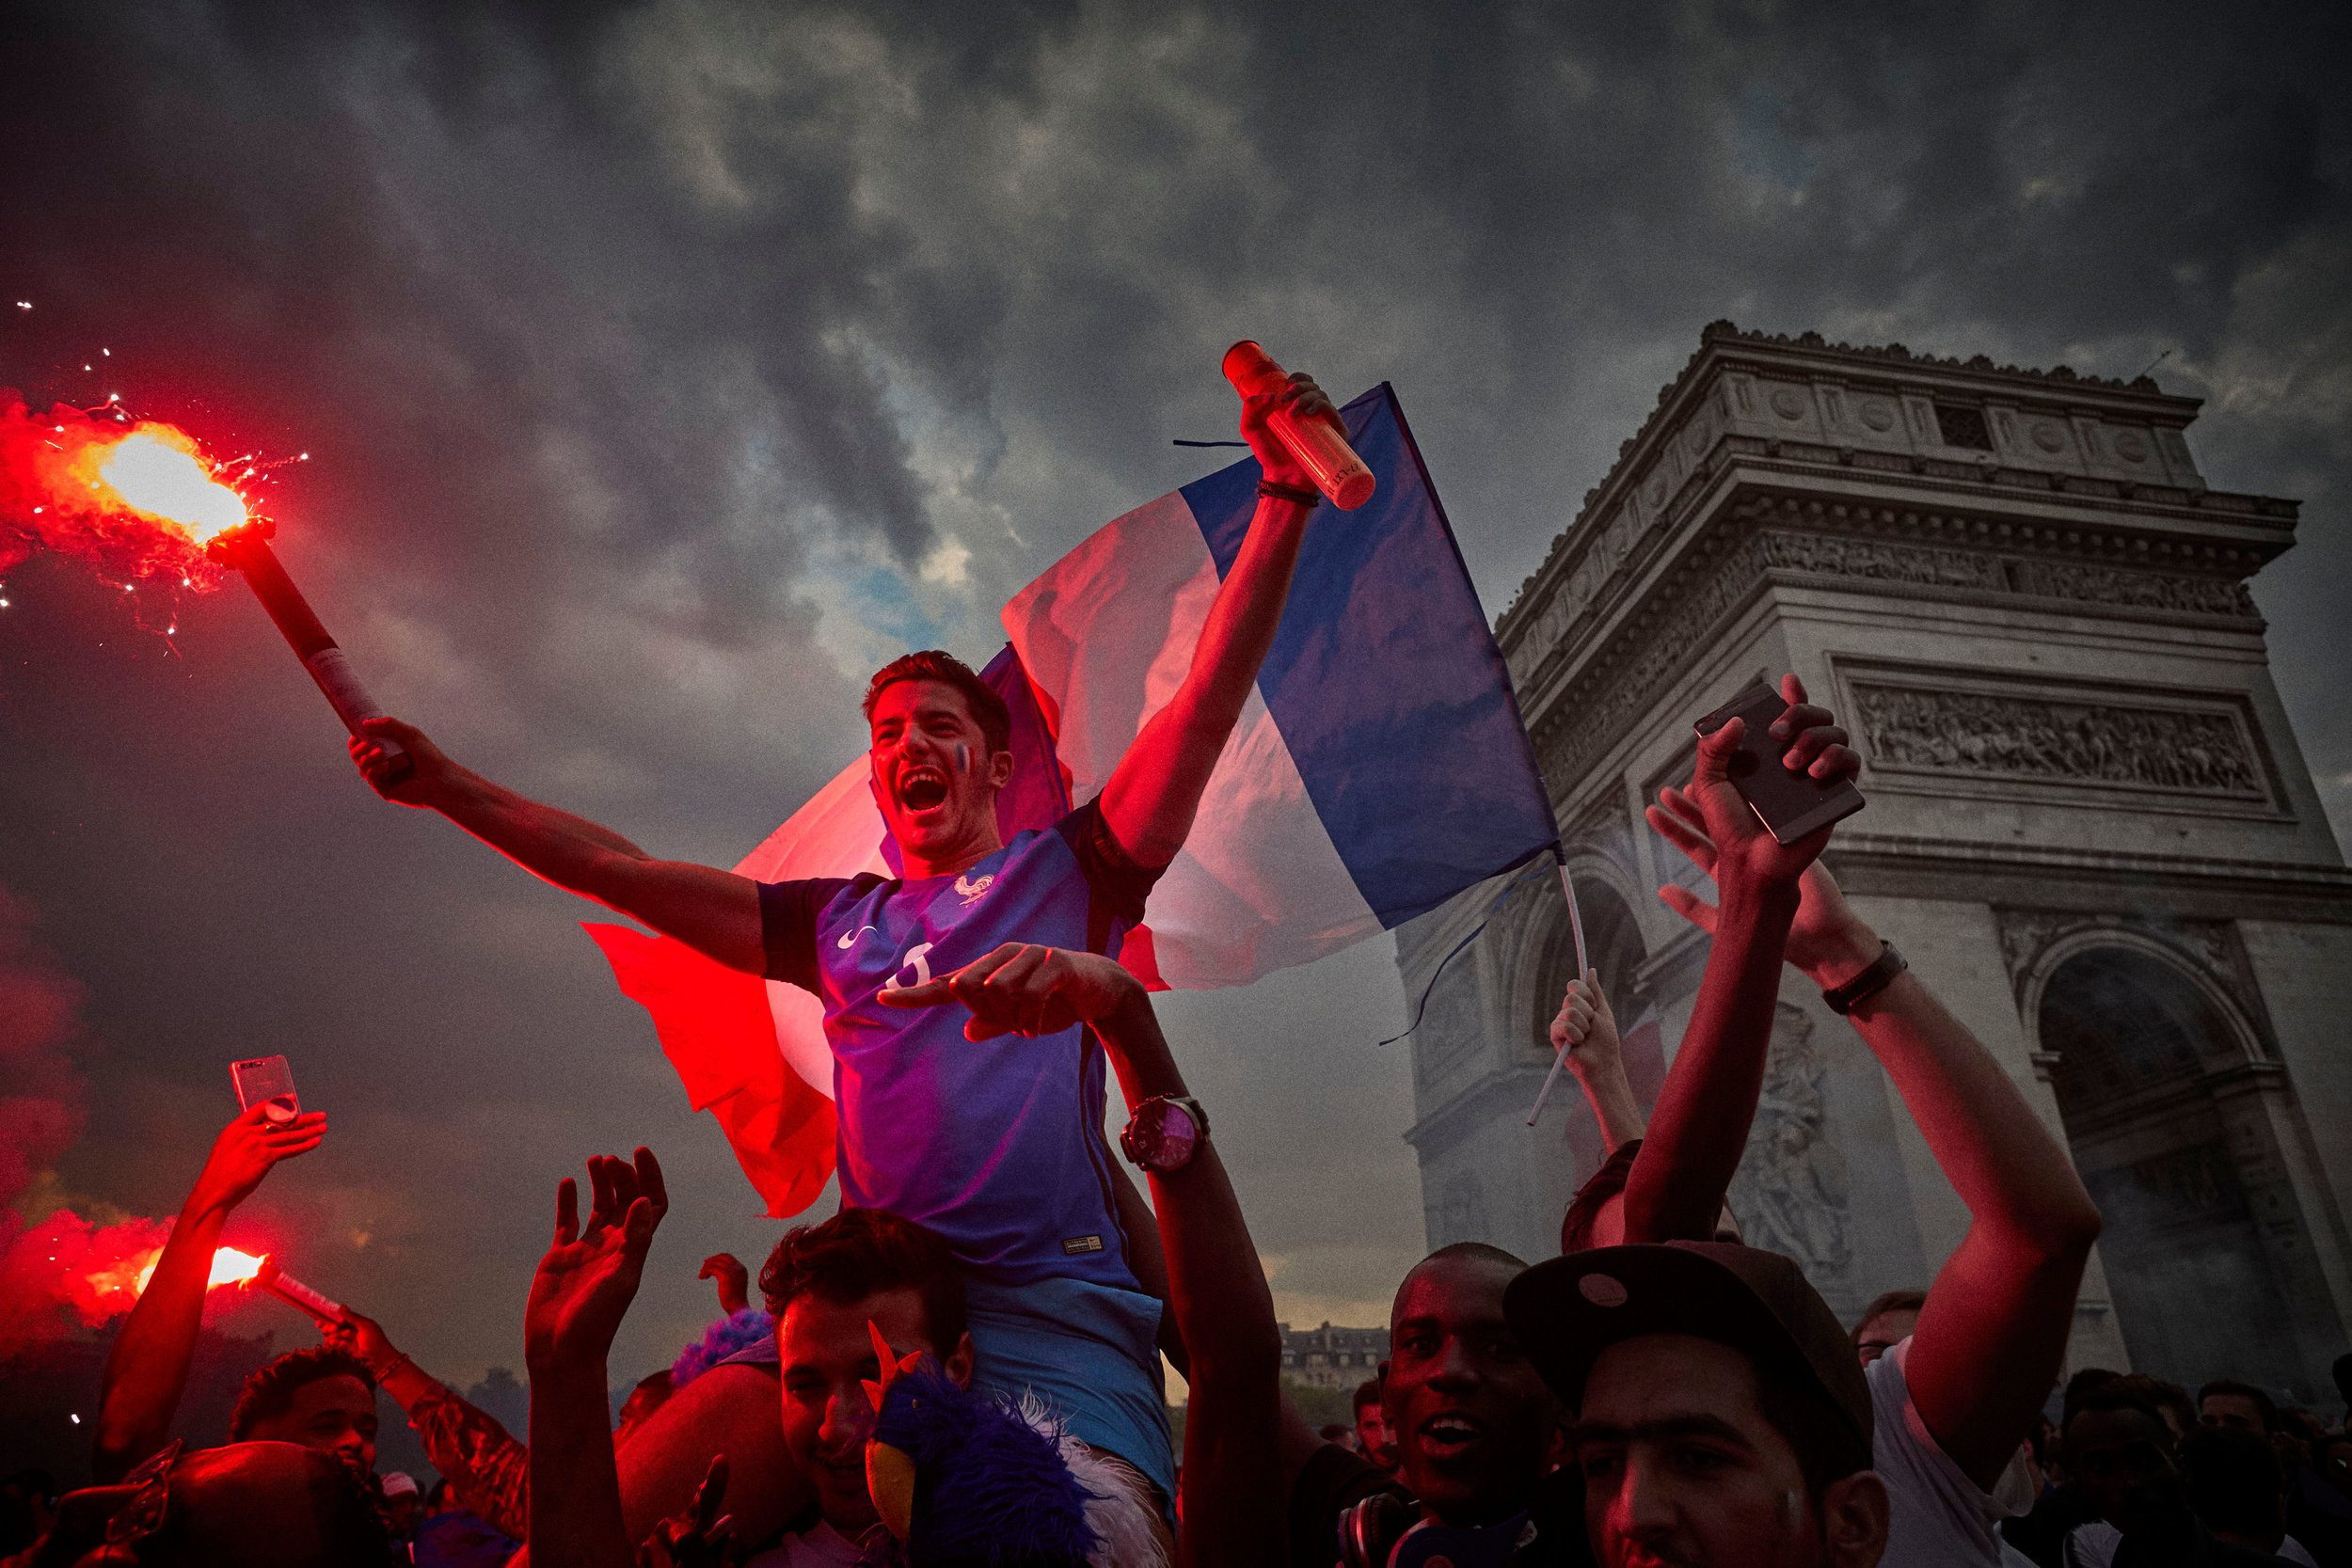  Fans the Arc de Triomph in Paris celebrate the French football team winning the 2018 FIFA World Cup, 20 years after they last won it. 
Photo by Kiran Ridley, 15 July 2018
 